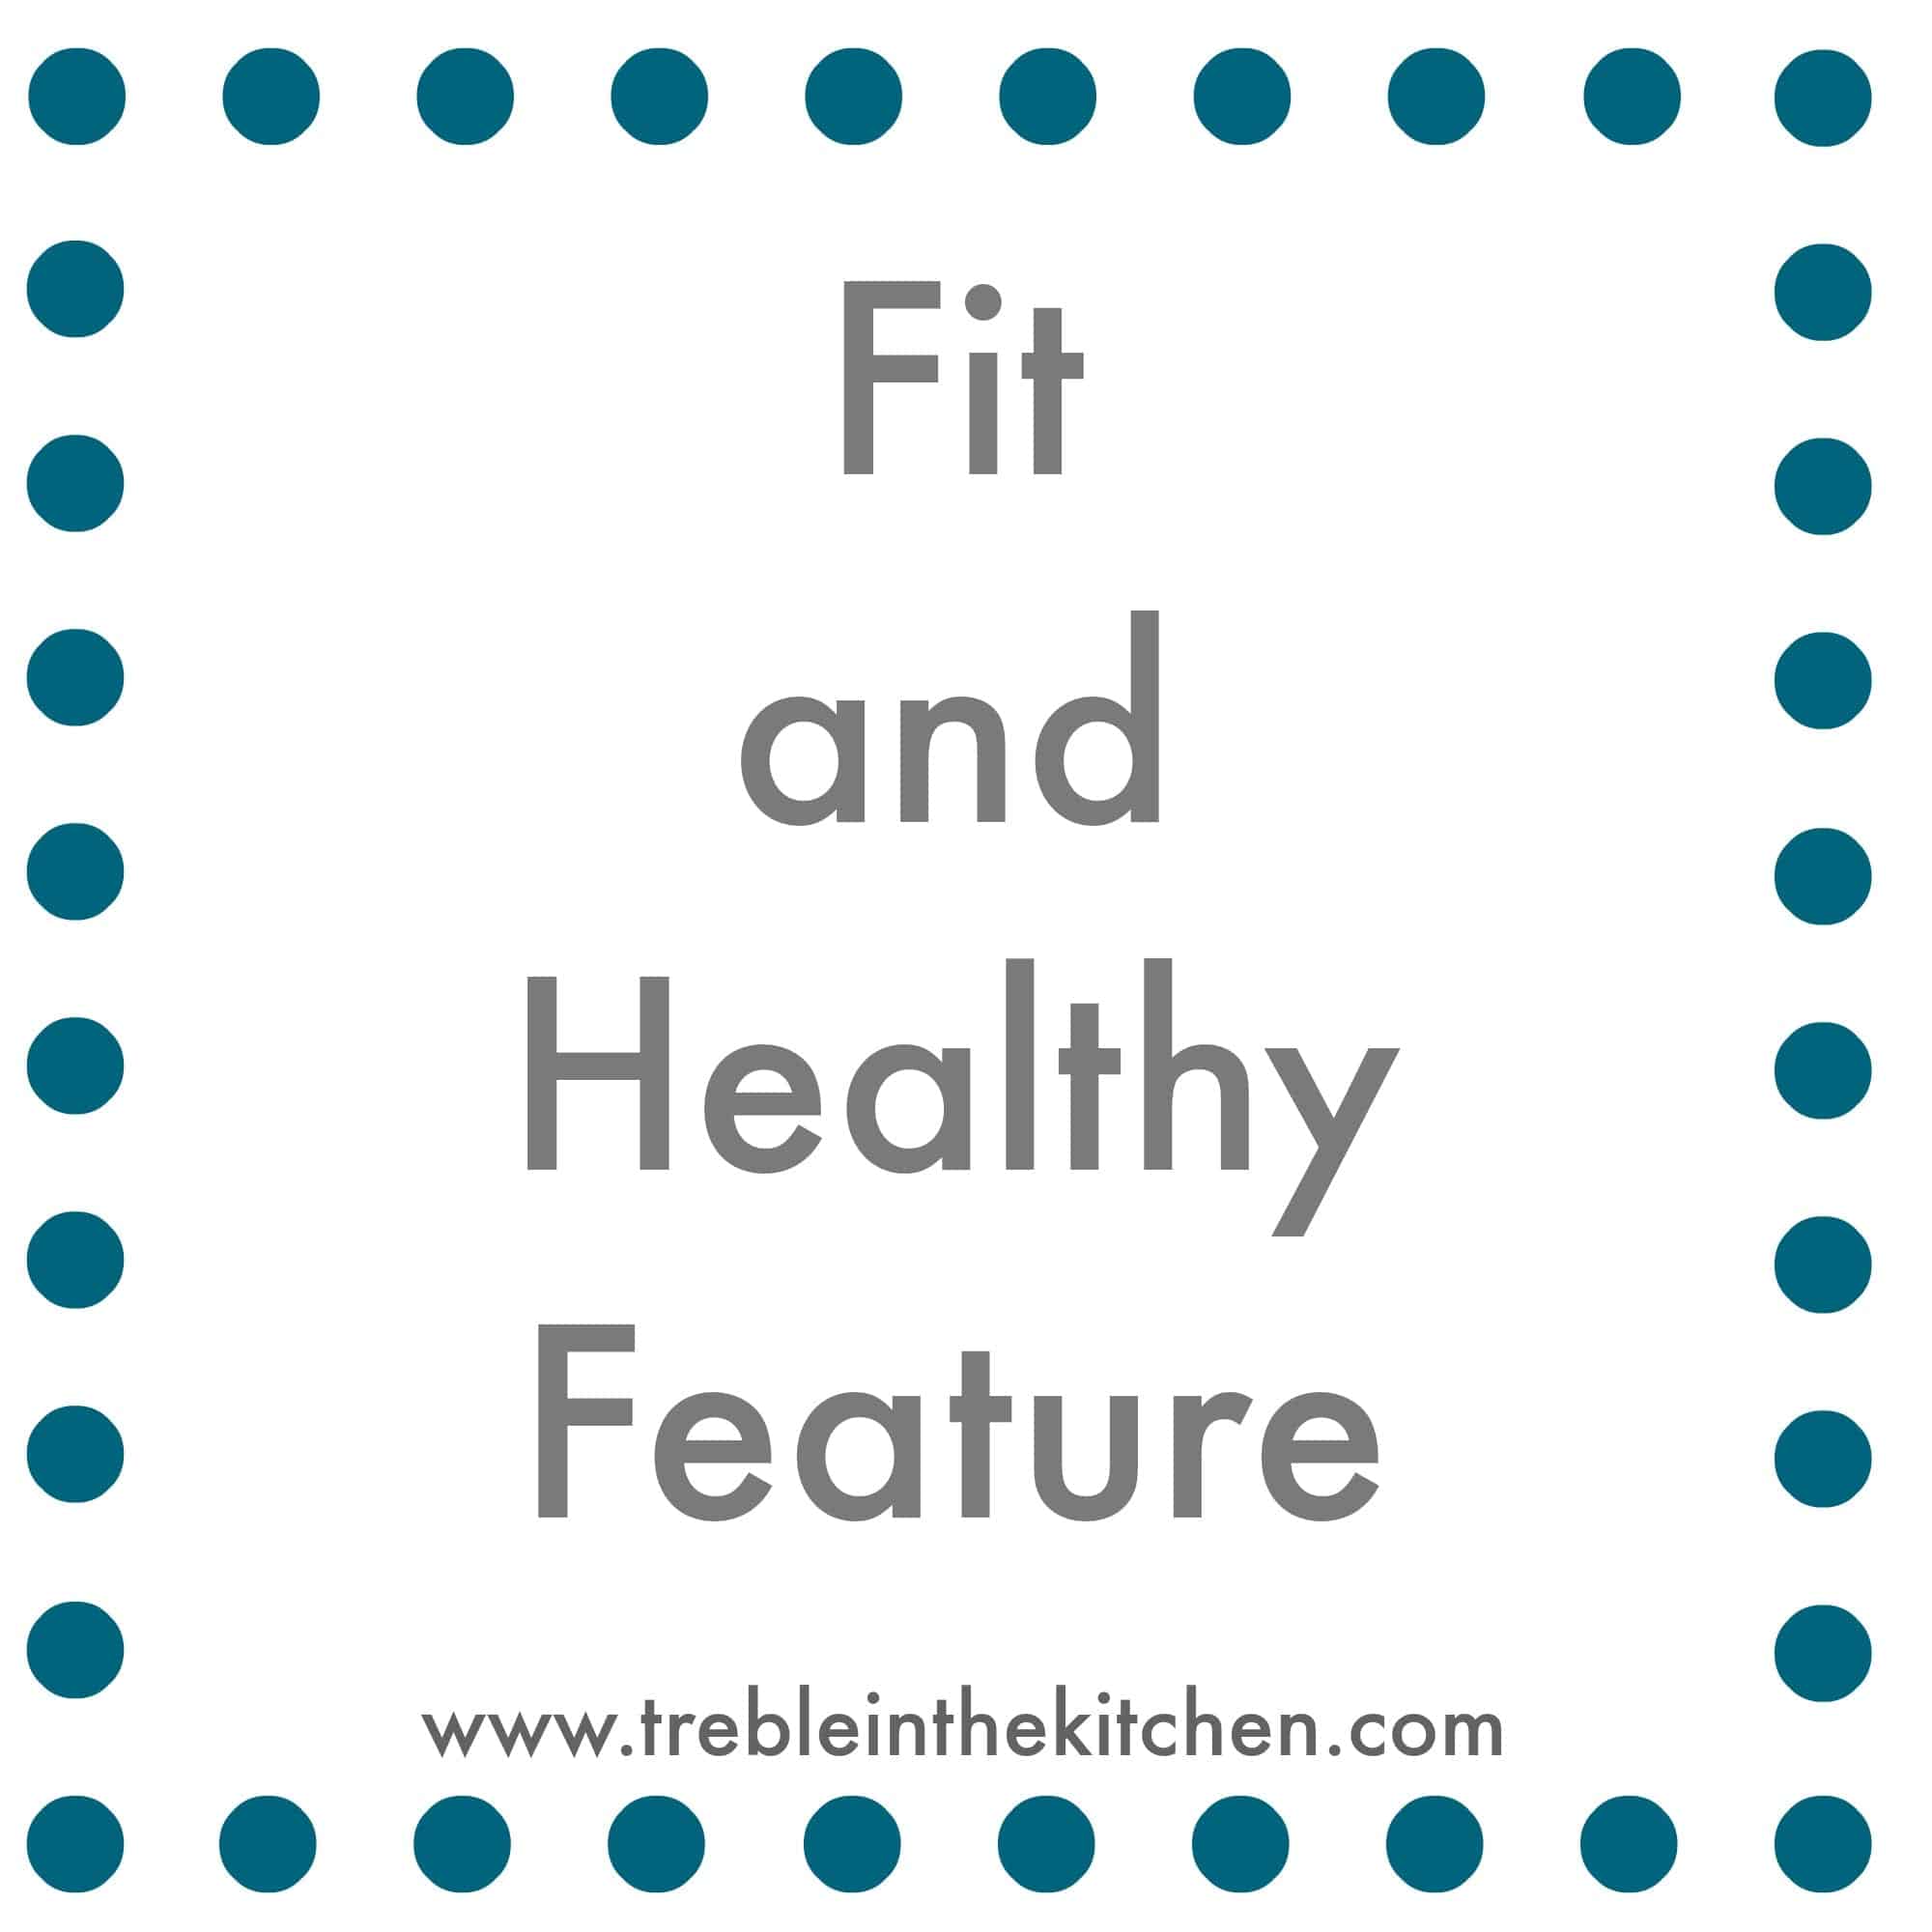 Fit and Healthy Feature via Treble in the Kitchen